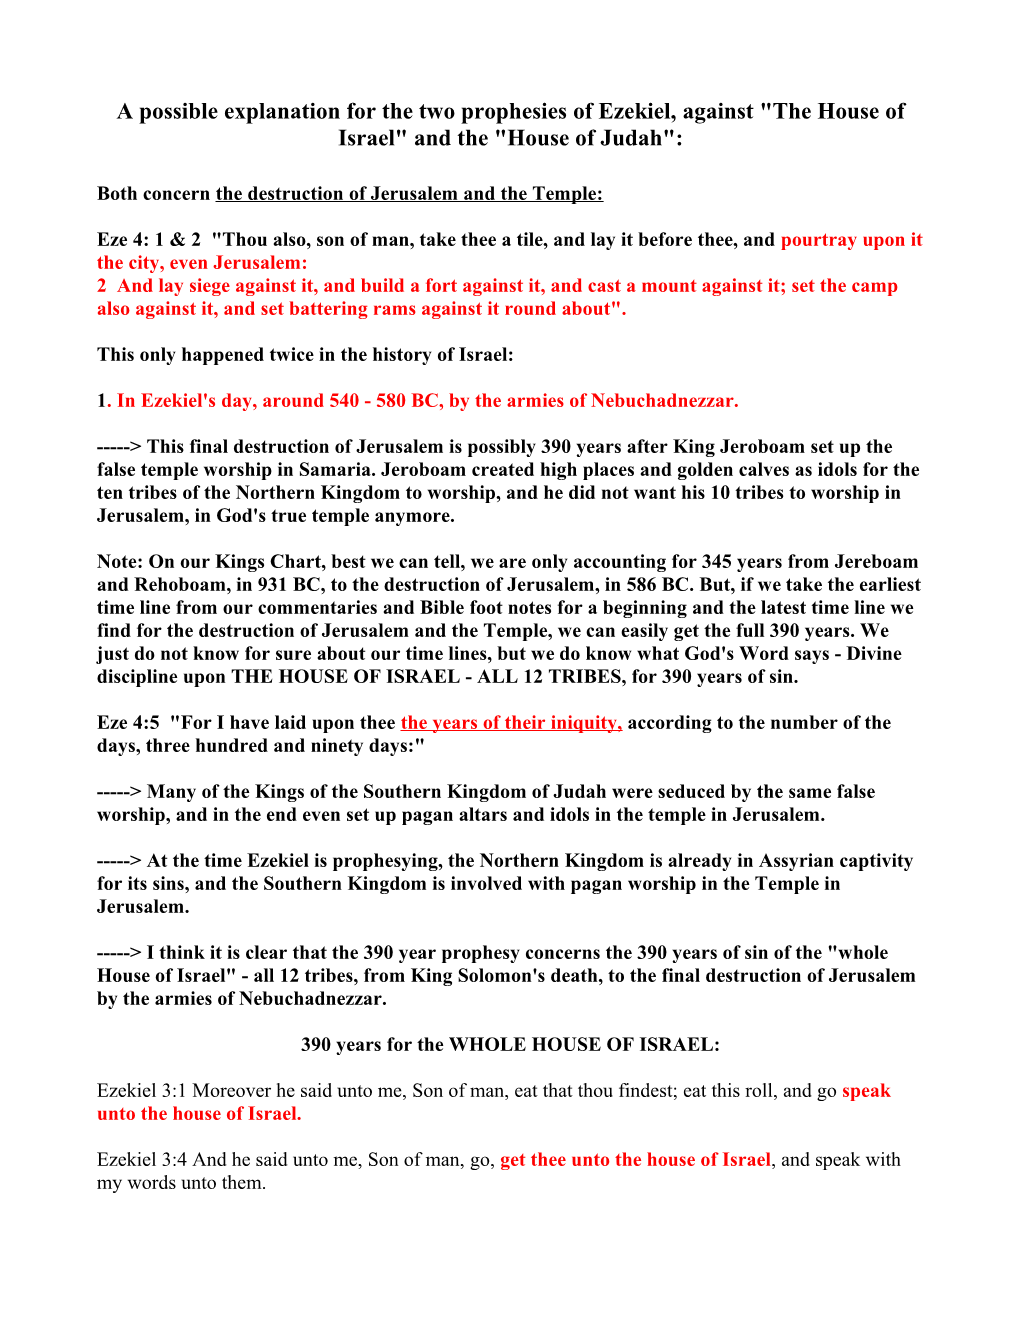 A Possible Explanation for the Two Prophesies of Ezekiel, Against the House of Israel And